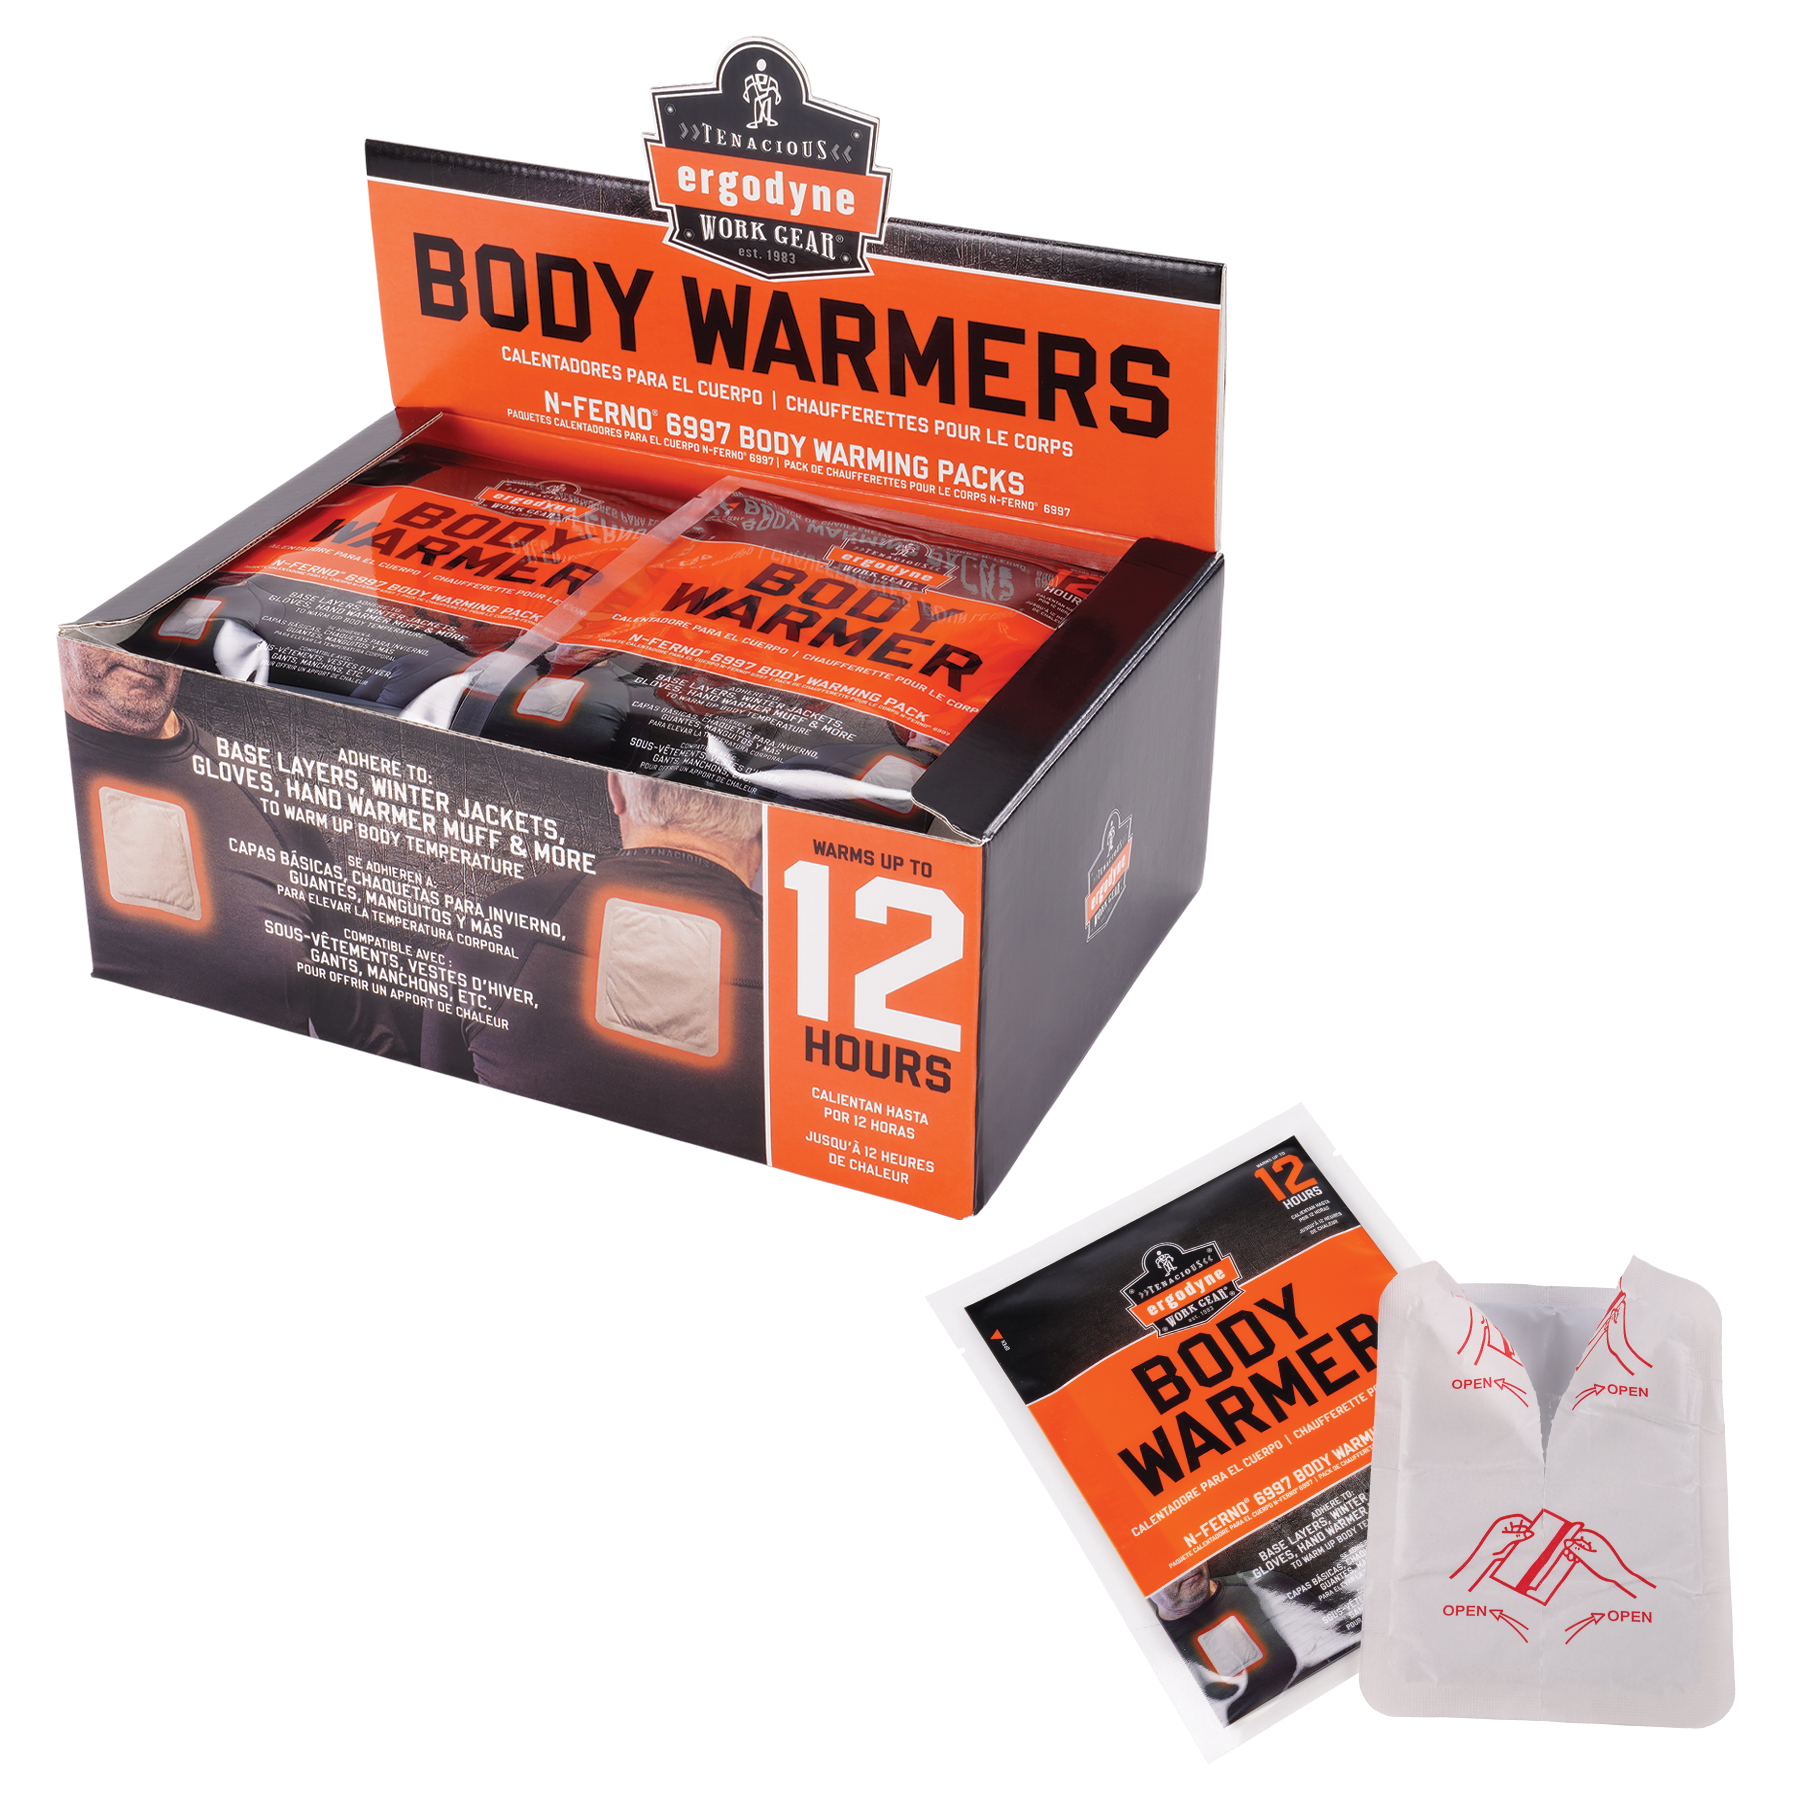 https://www.ergodyne.com/sites/default/files/product-images/6997-adhesive-body-warmers-box-and-warmers.jpg